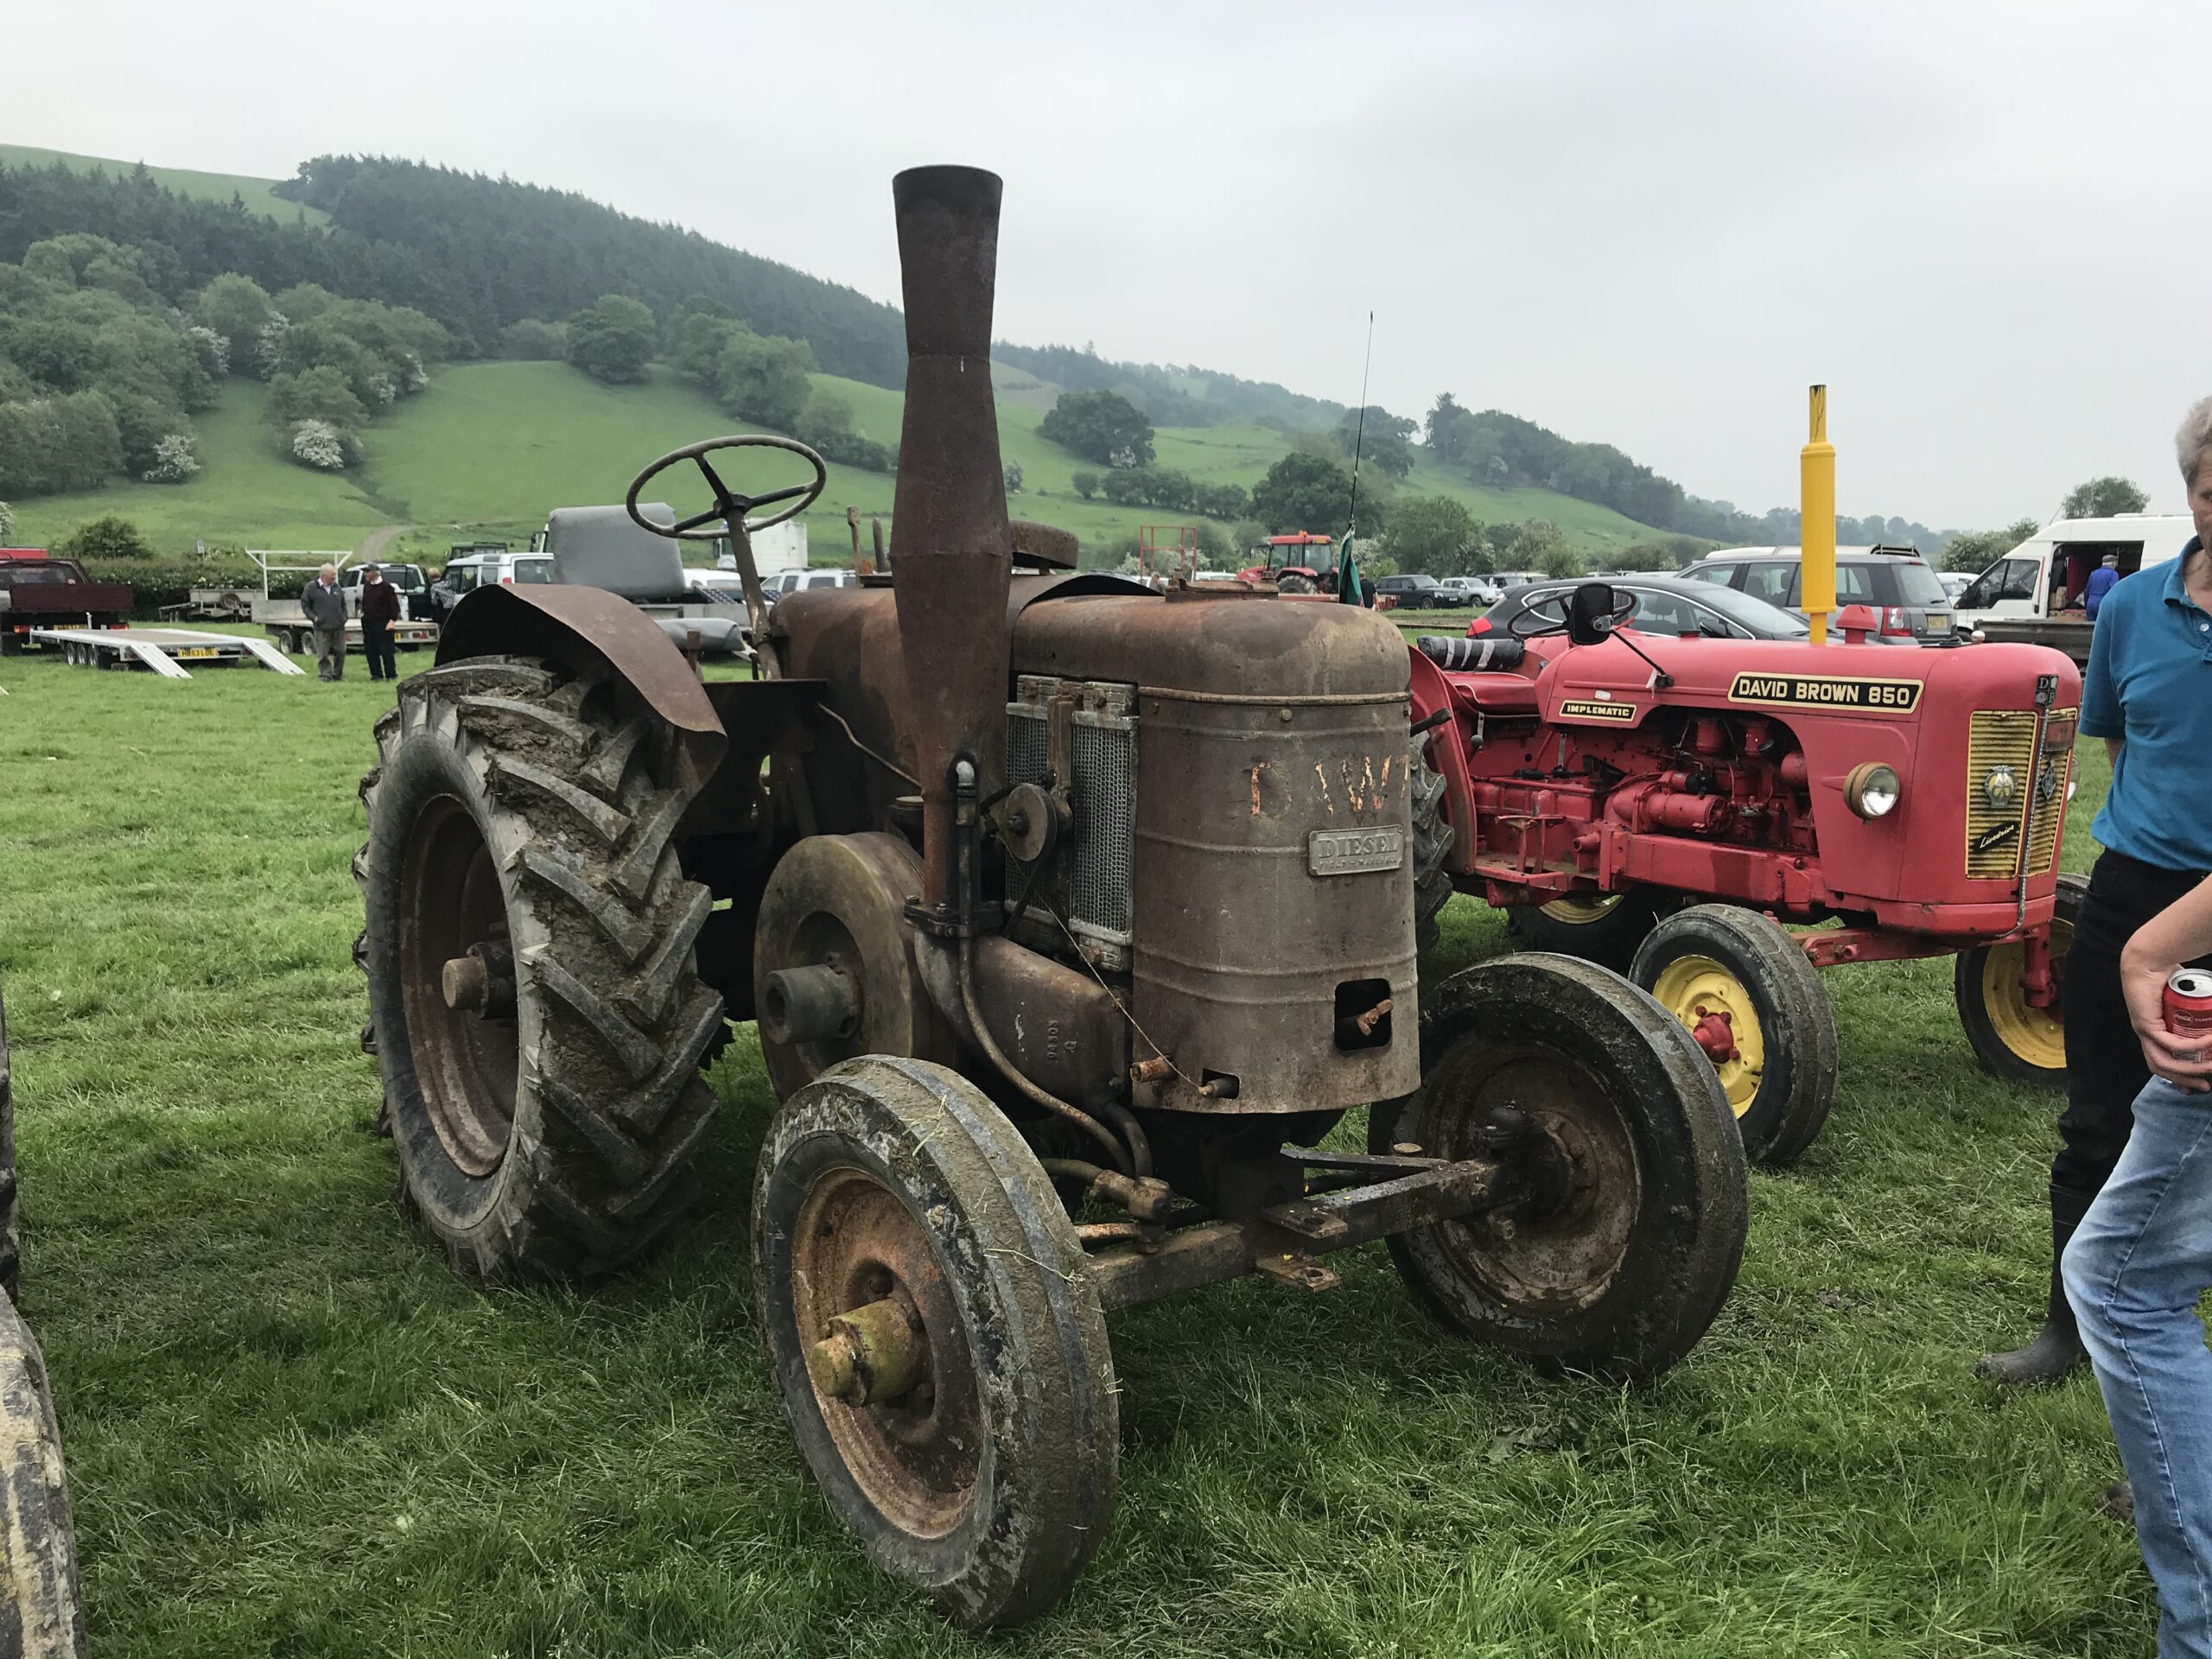 Caersws Vintage Rally 2018 – Thank you